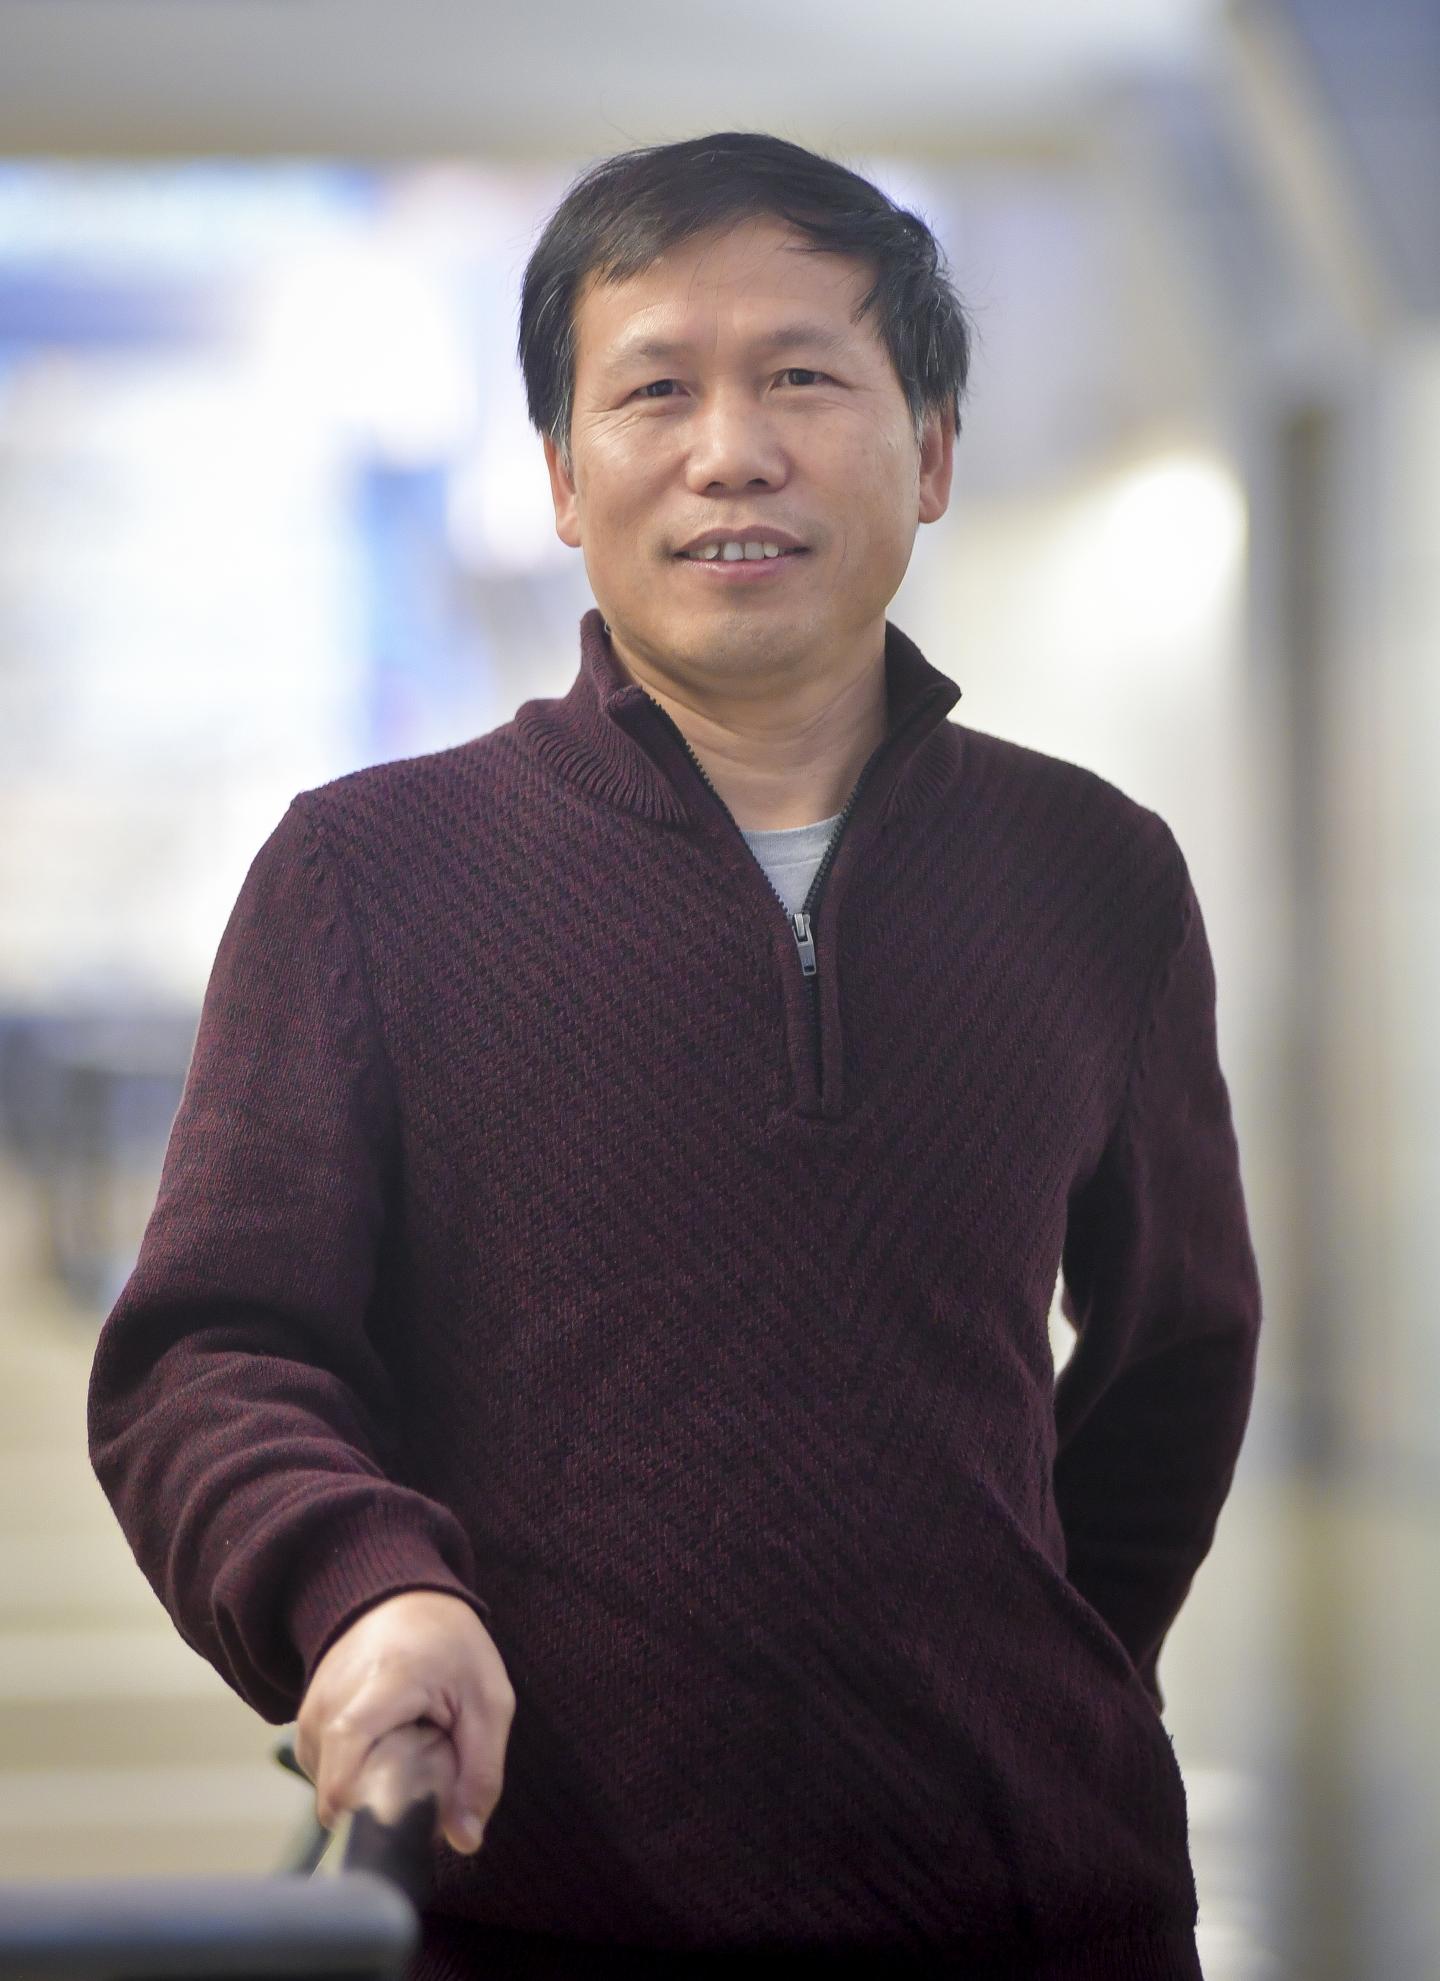 Dr. Xiping Zeng, US Army Research Laboratory